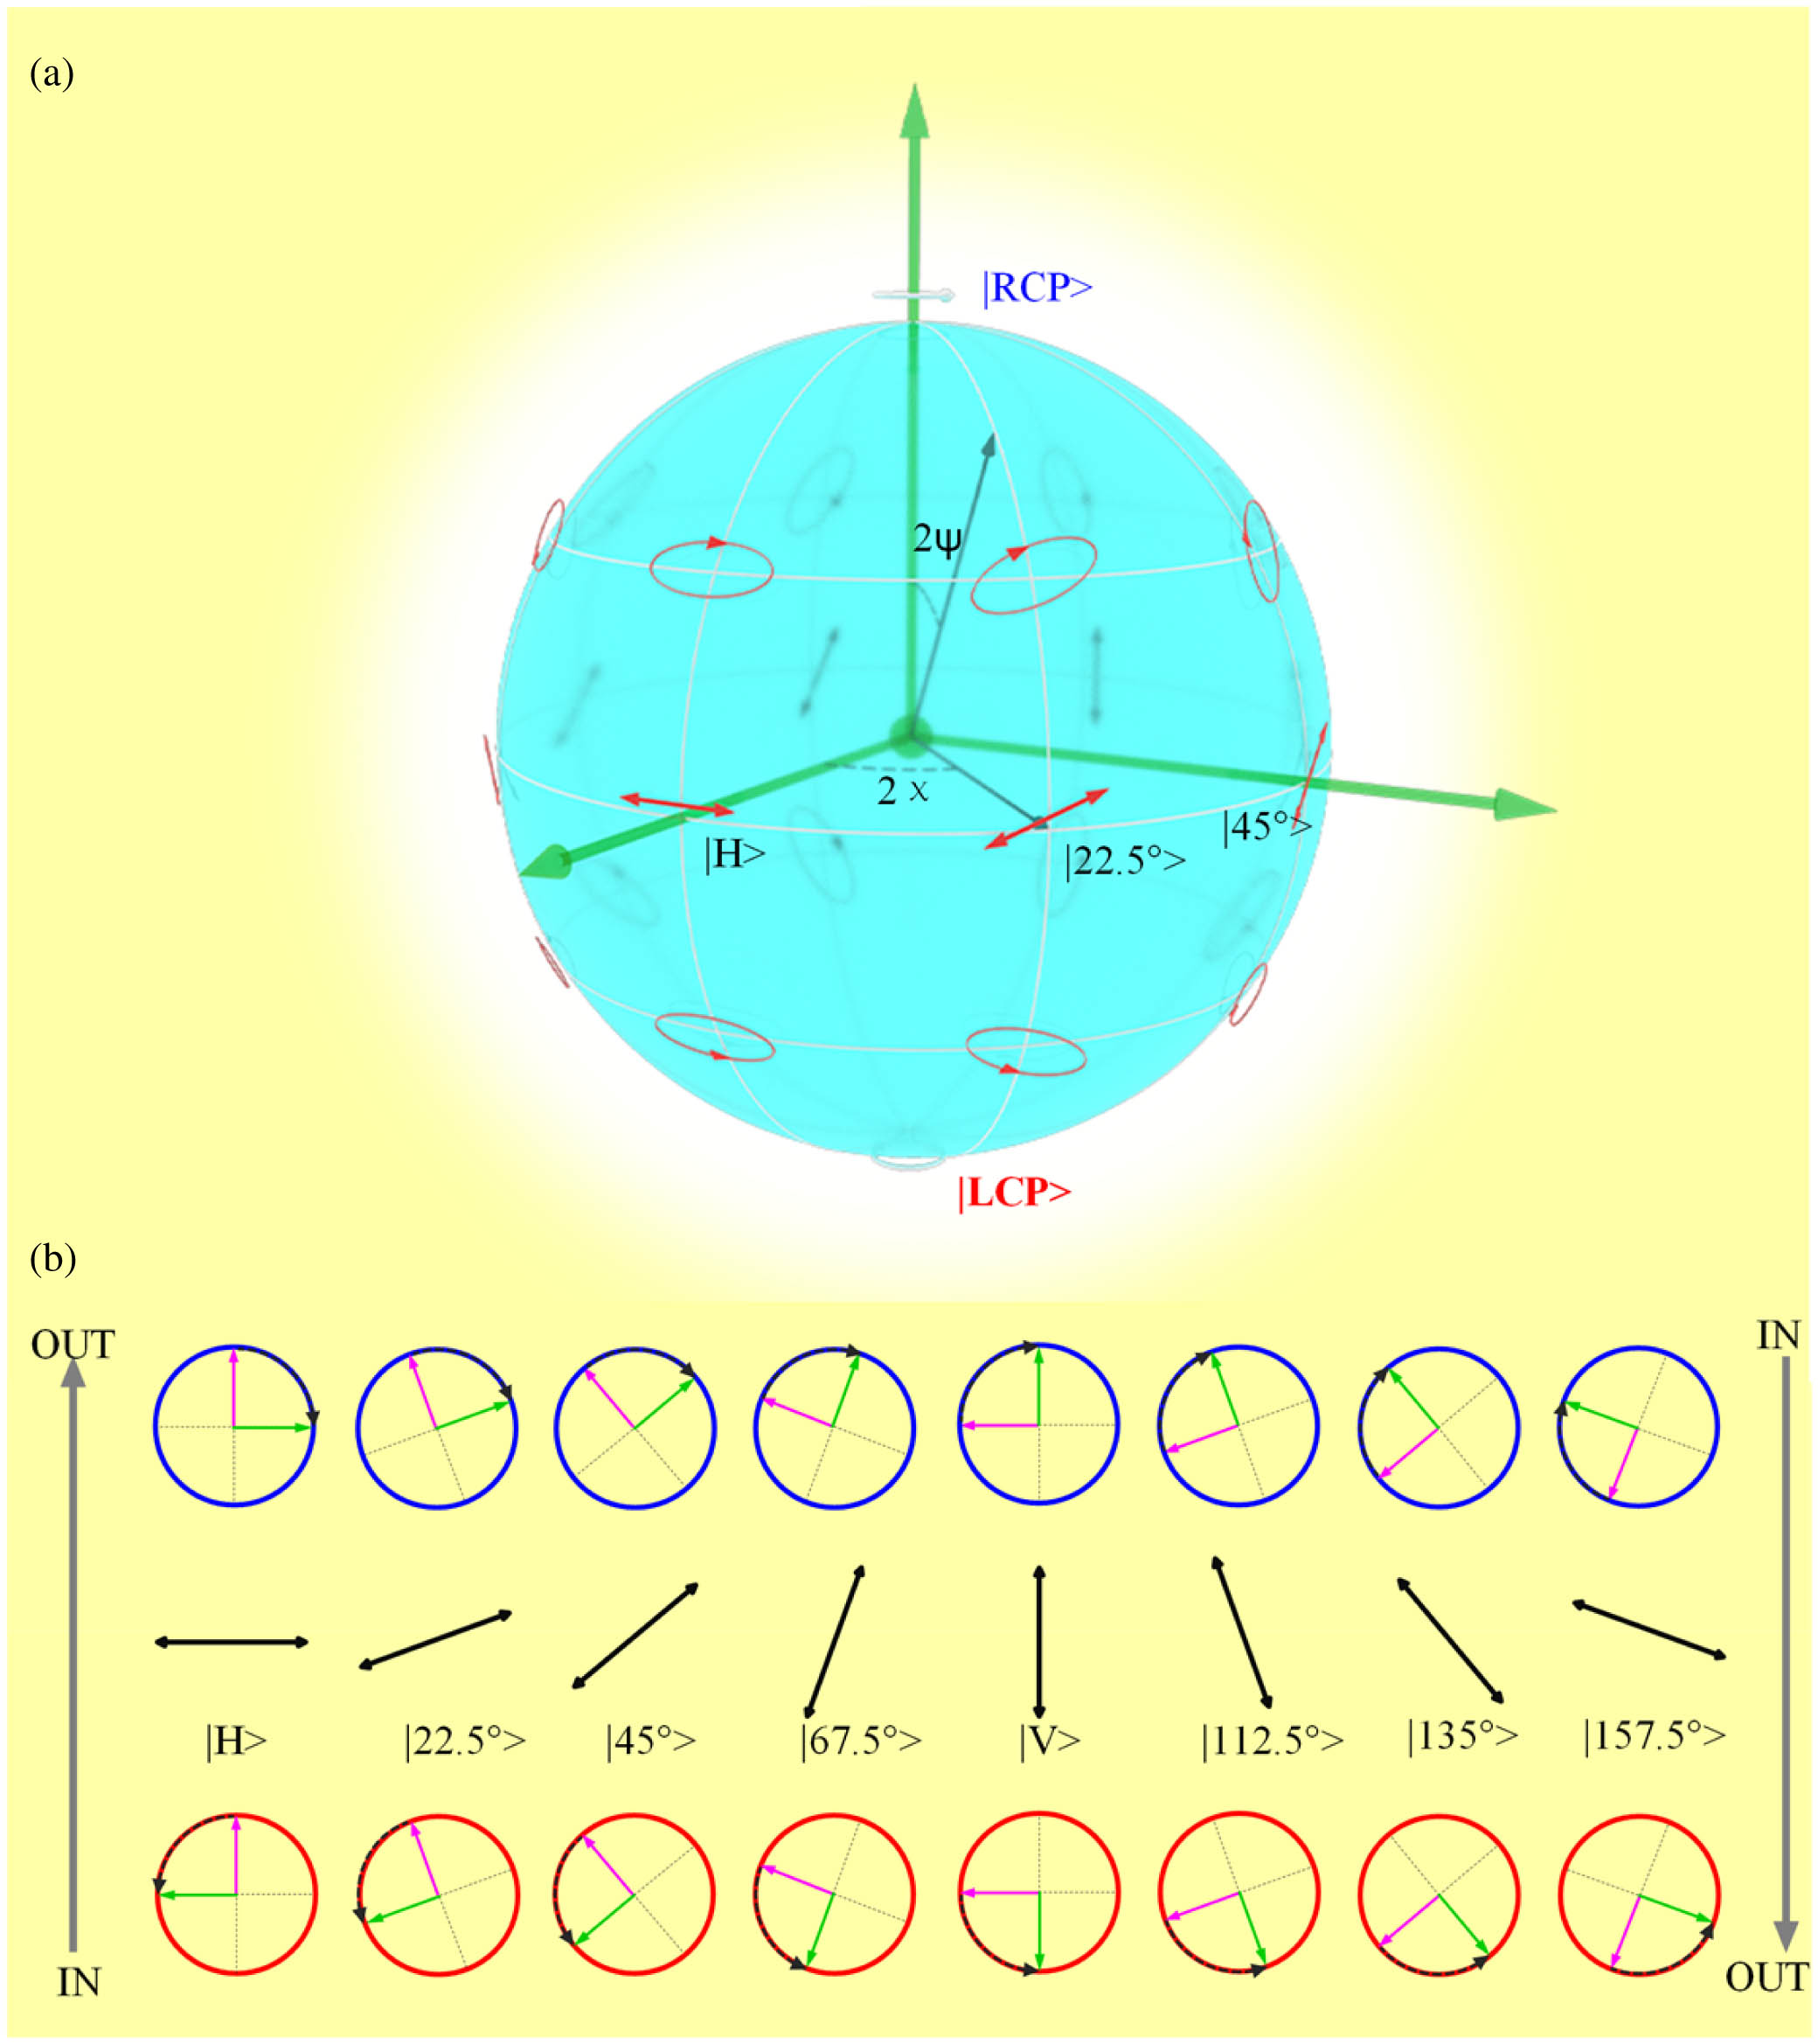 Geometric phase by rotation. (a) Schematic diagram of the Poincaré sphere. (b) Schematic diagram of the evolutionary path for the circular polarization on the Poincaré sphere. IN represents the incident polarization state, and OUT represents the reflected polarization state. The evolutionary path for the circular polarization on the Poincaré sphere must pass a point at the equator (middle row). Each column represents an evolutionary path. The top row is the RCP state, the middle row is the linear polarization state with a different polarization angle, and the bottom row is the RCP state. Green and purple arrows indicate the electric and magnetic fields, and black arrows show the polarization vectors, respectively [32].